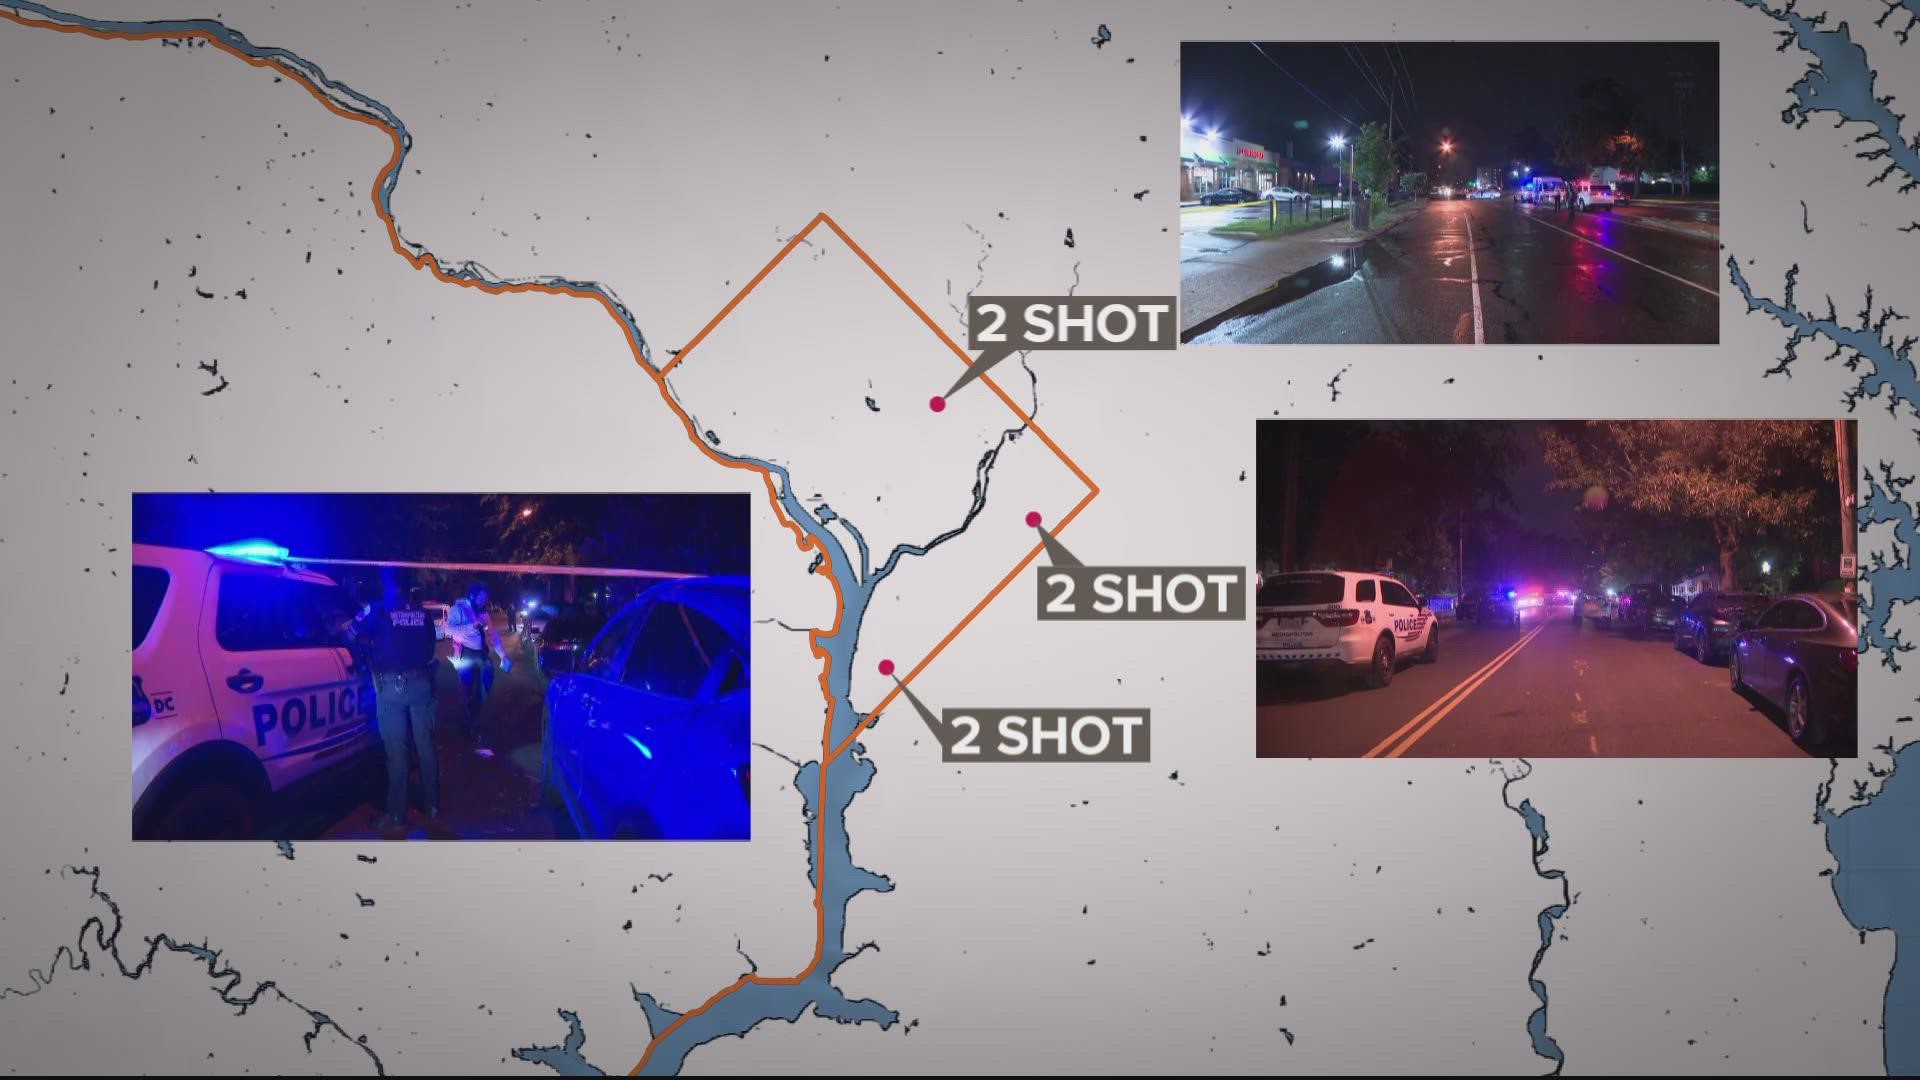 Police say 11 people were shot in D.C. within a span of less than 12 hours in six separate shootings, sparking multiple investigations.